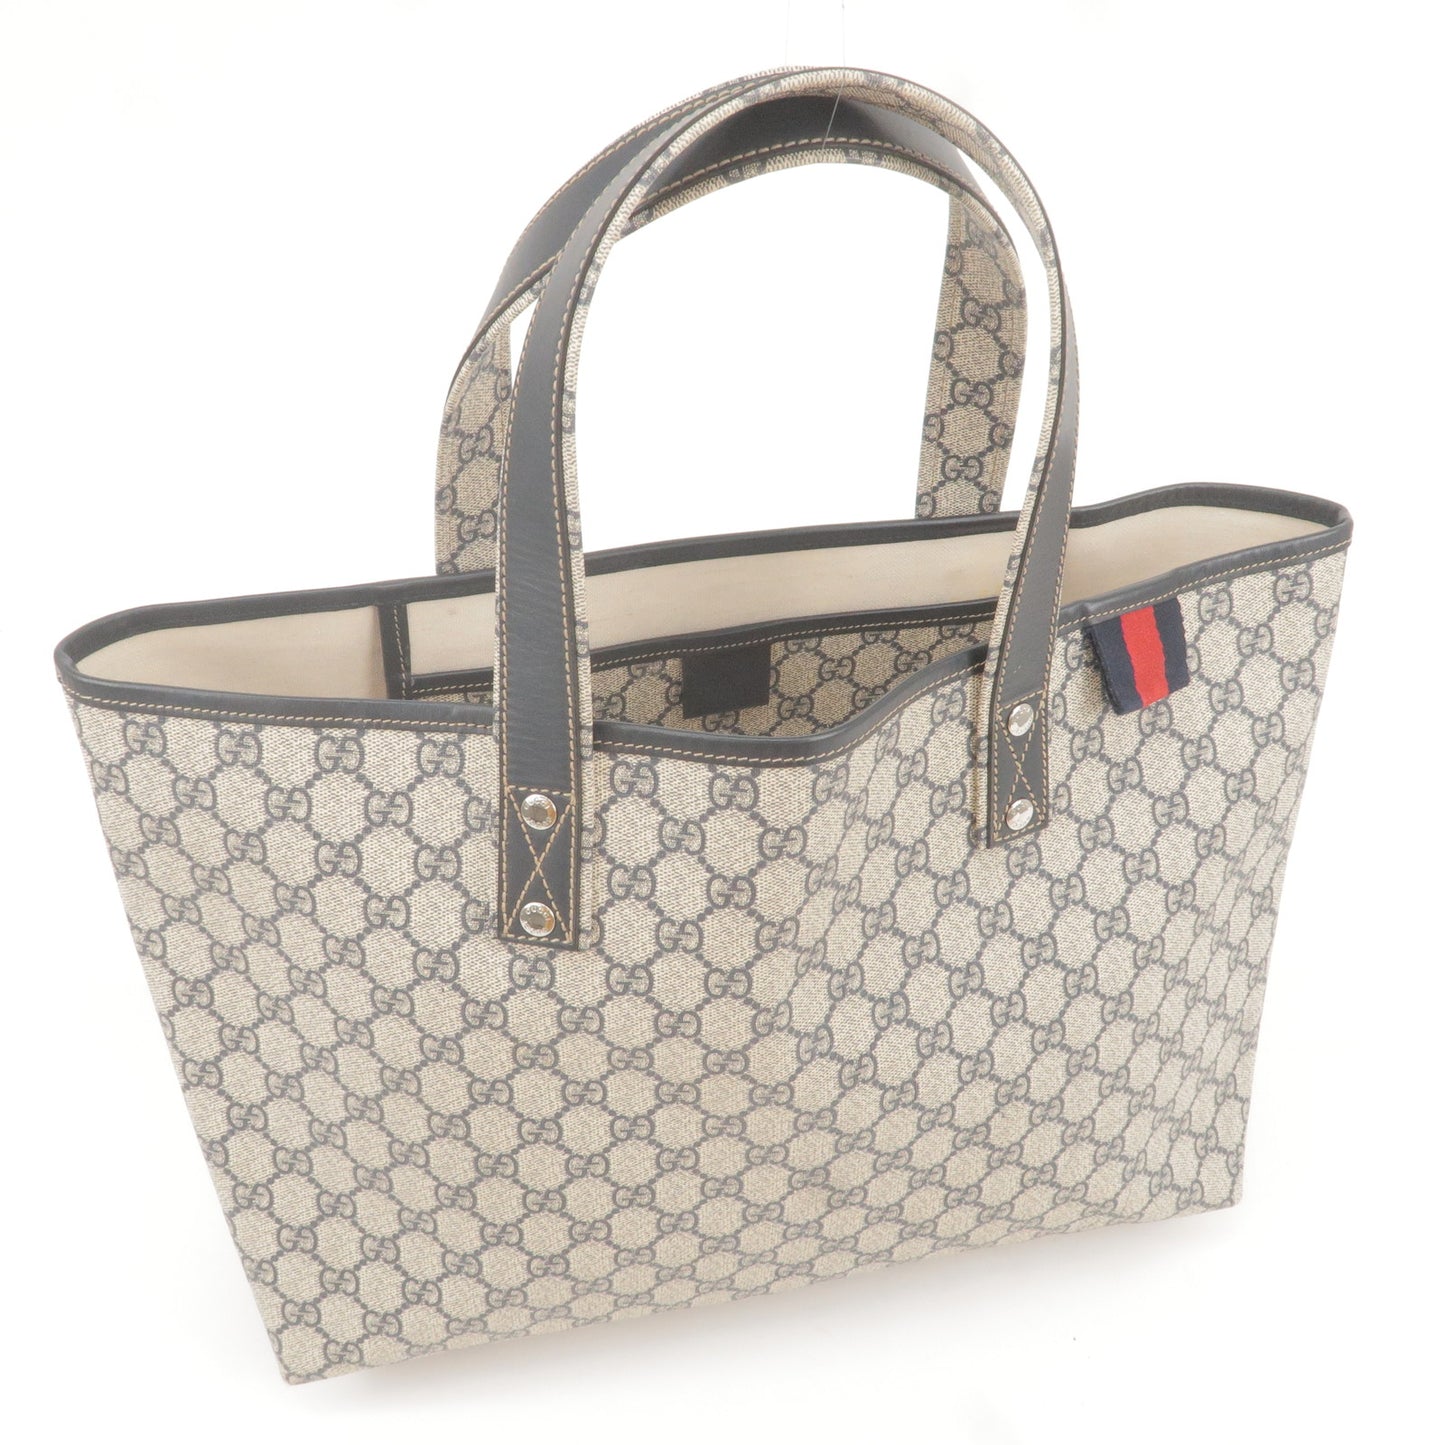 GUCCI Sherry GG Supreme Leather Tote Bag Navy Beige 211134